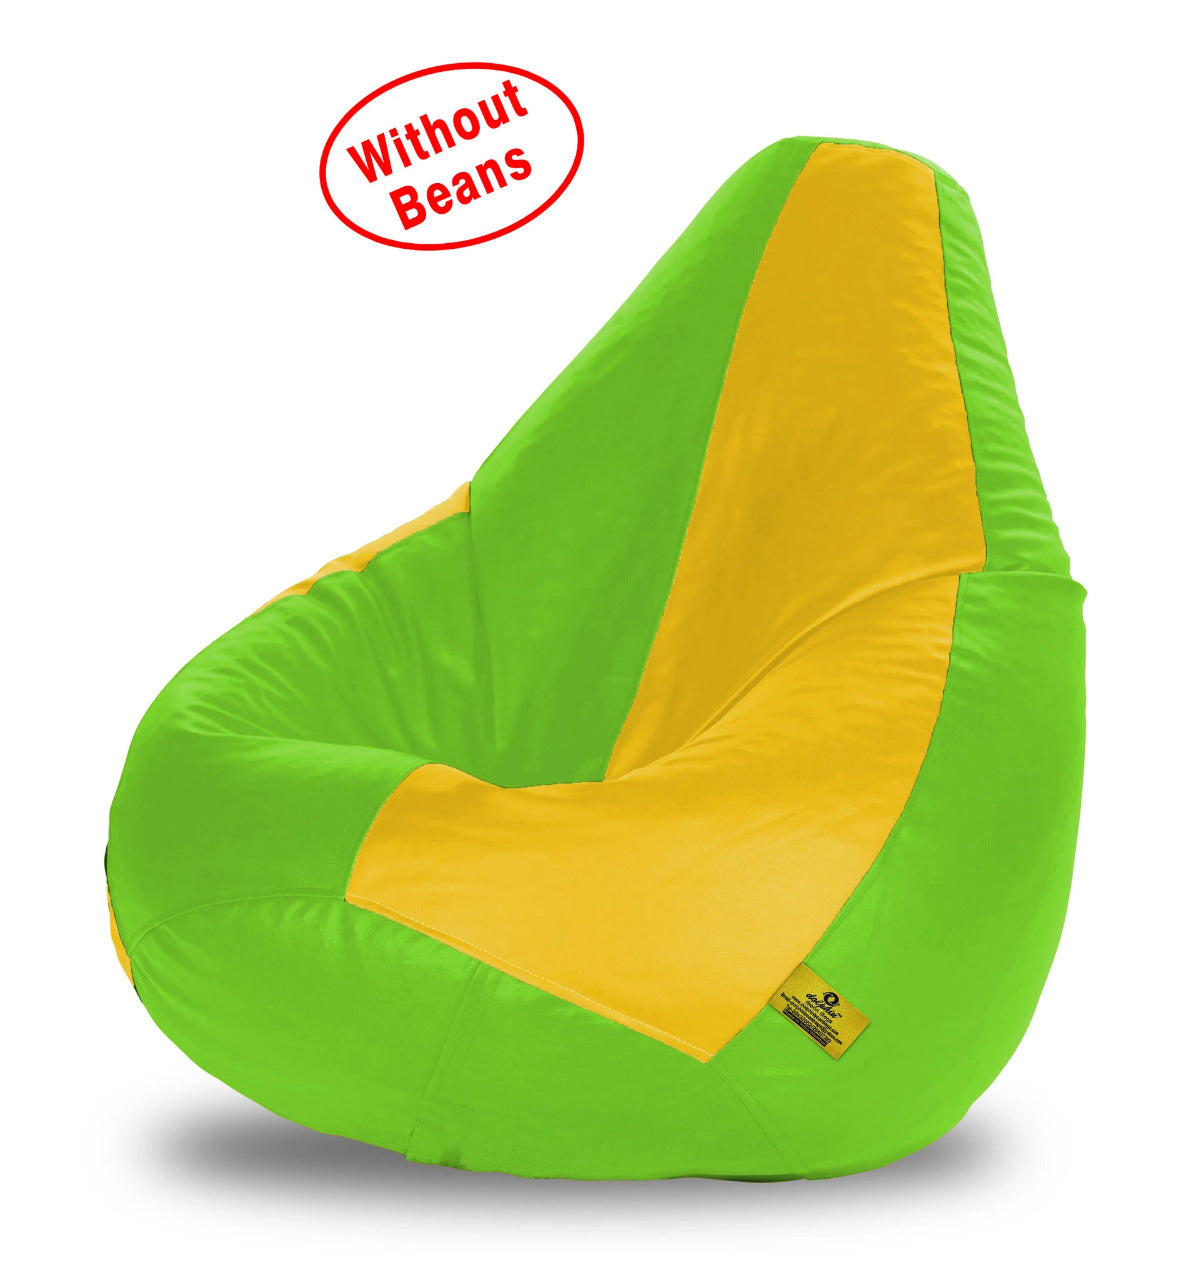 Beat Bag XXXL F.GREEN&YELLOW BEAN BAG-COVERS(Without Beans)